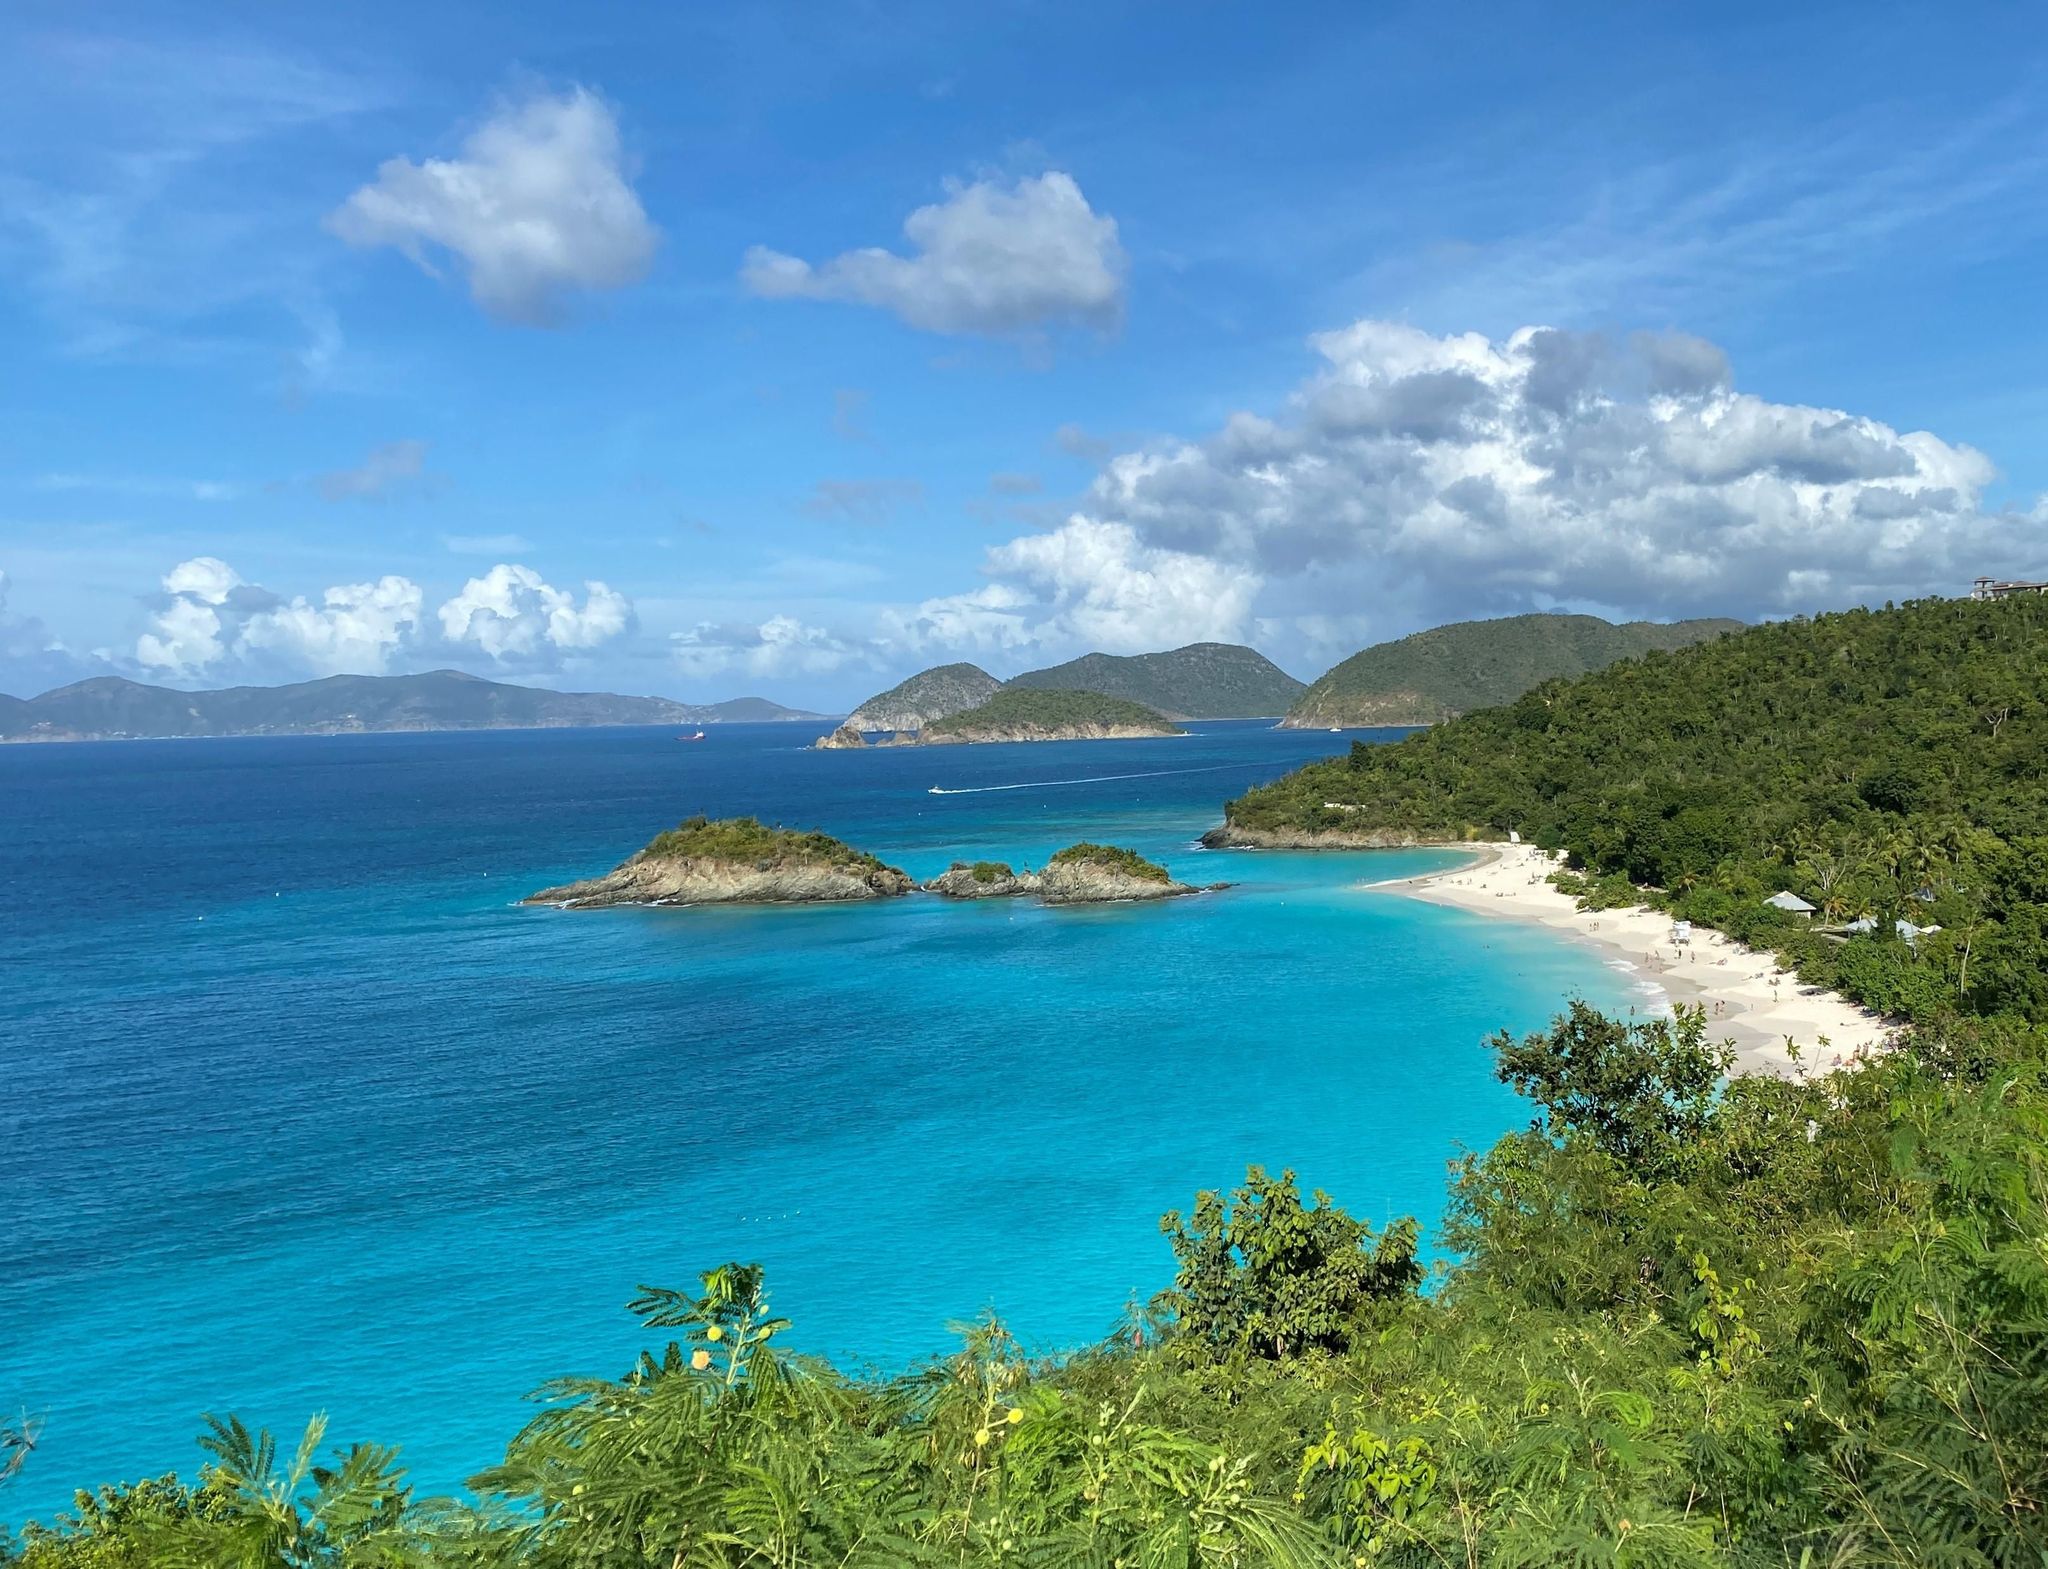 Renowned for its beauty, Trunk Bay is a visitor favorite.